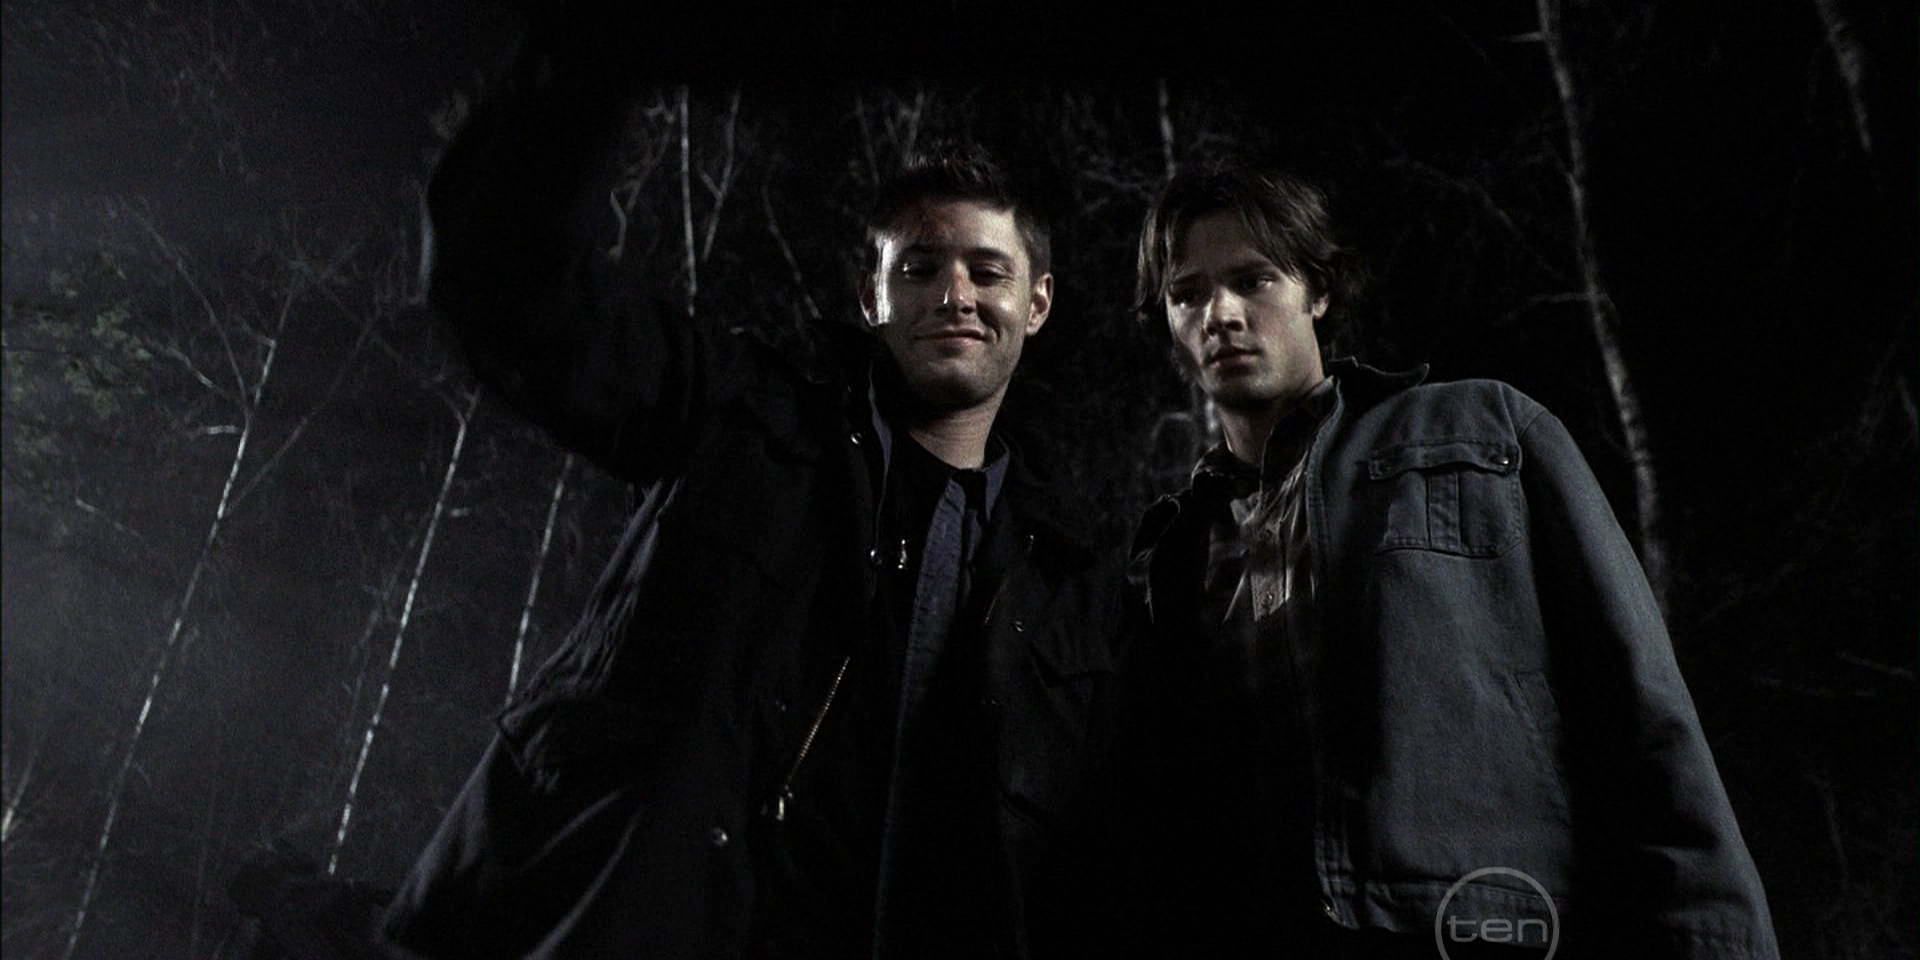 Dean and Sam get ready to hunt the demons from hell in Supernatural